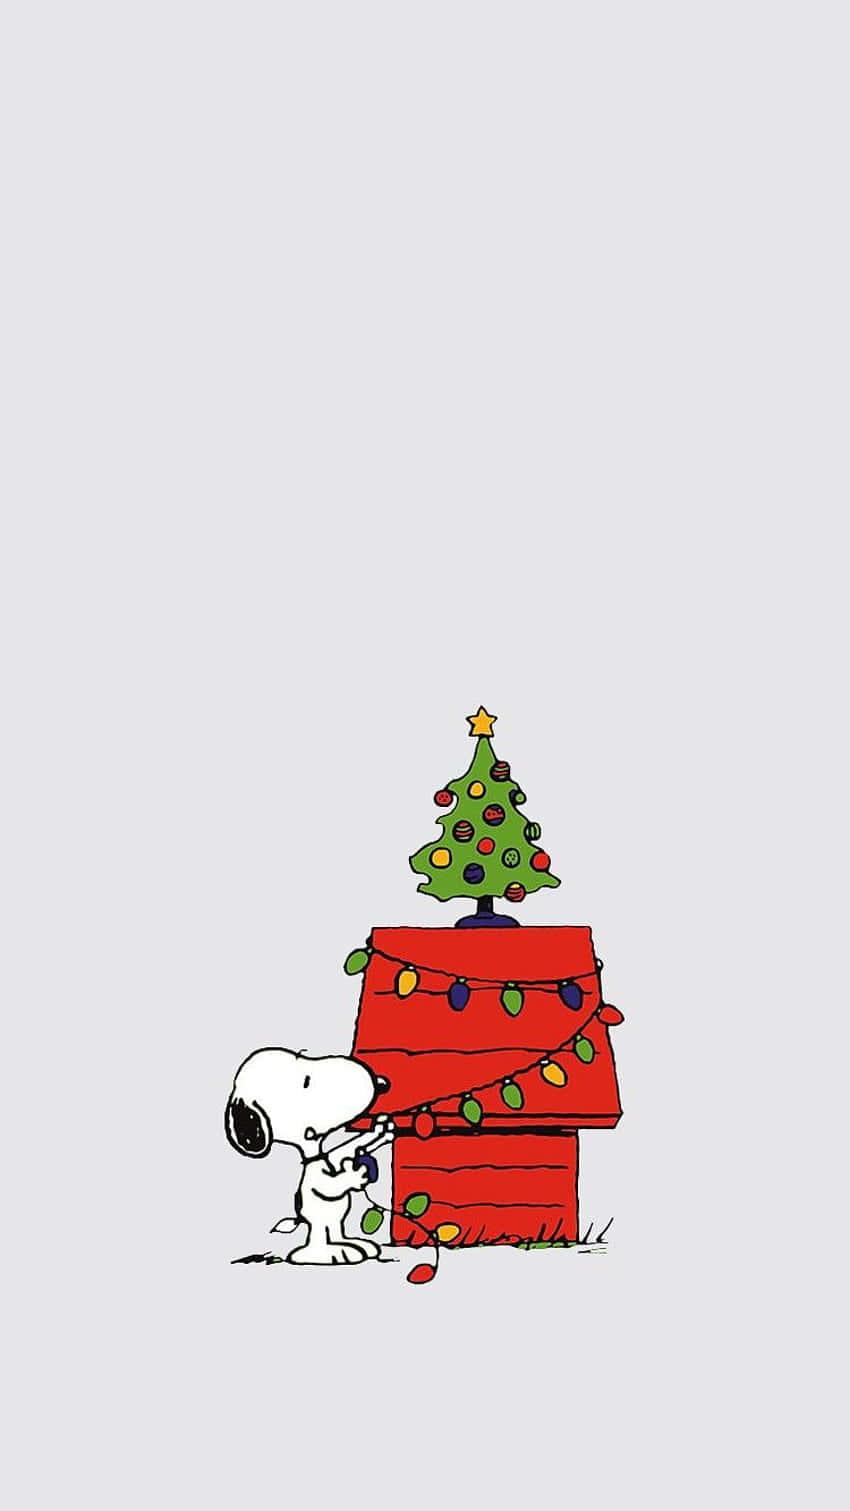 Snoopy And His Dog Are Standing Next To A Christmas Tree